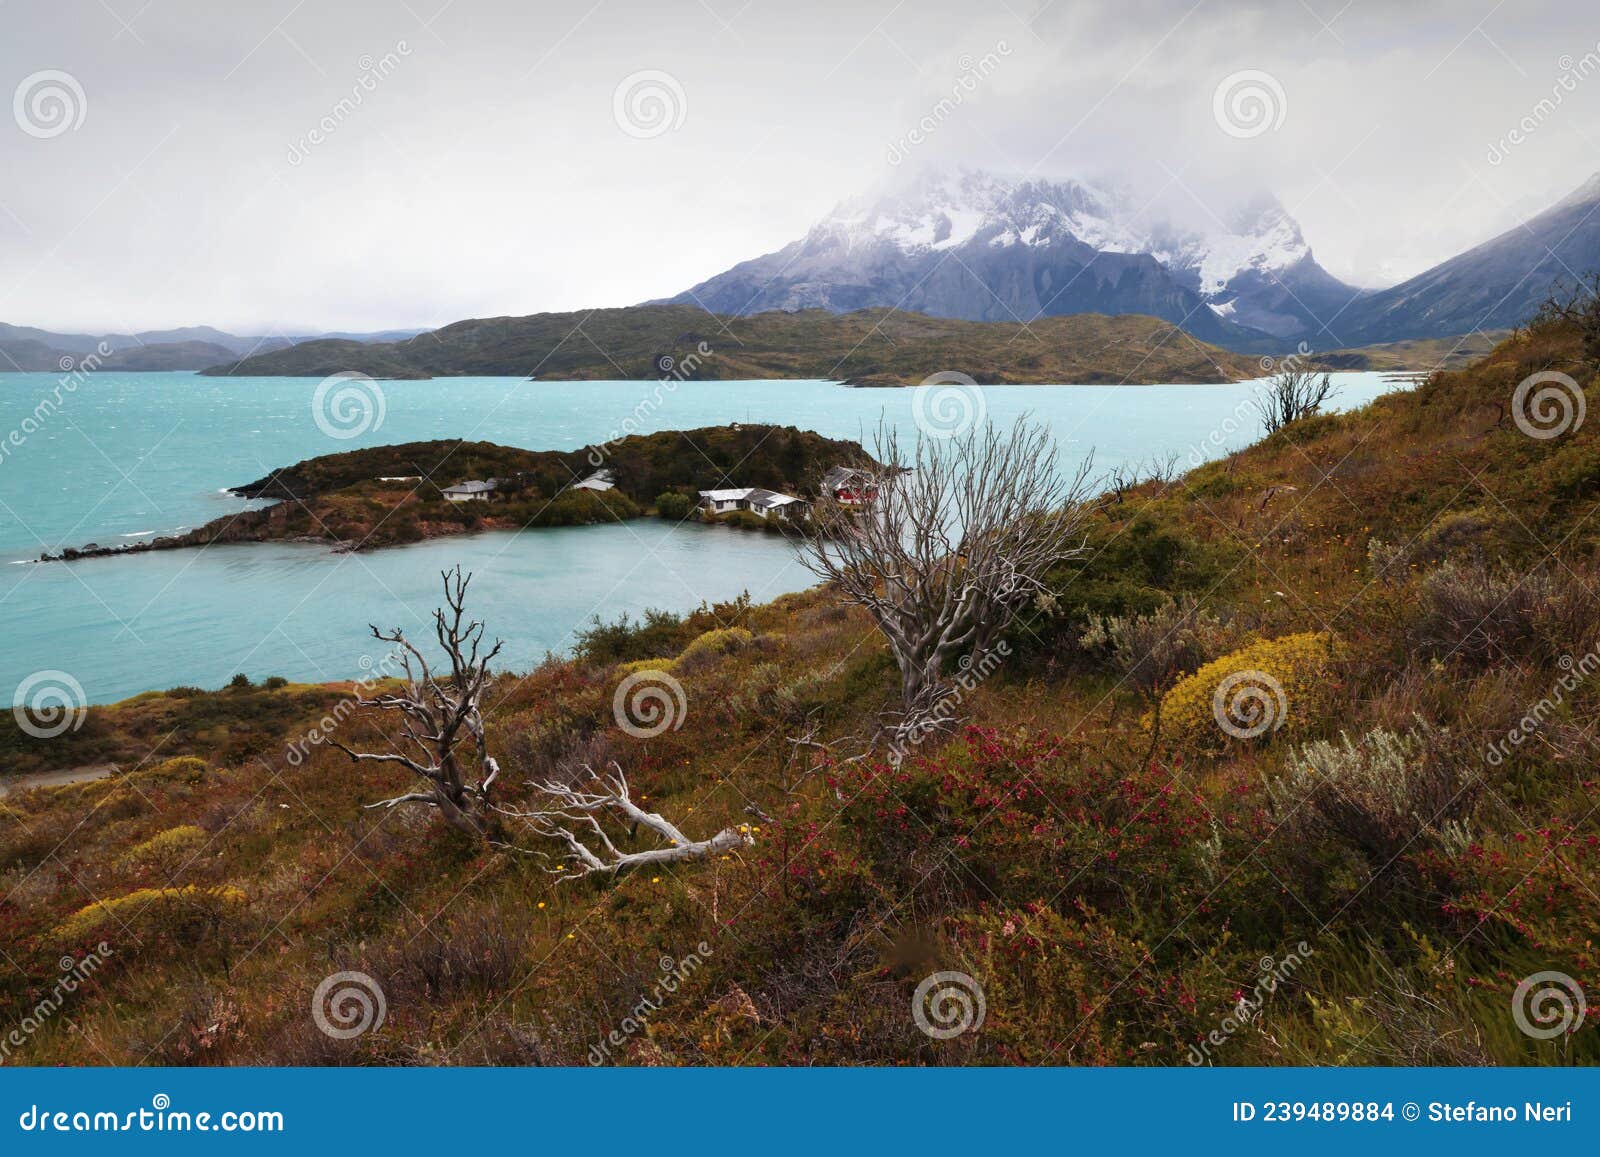 landscape of torres del paine np with the turquoise of lago pehoe, chile